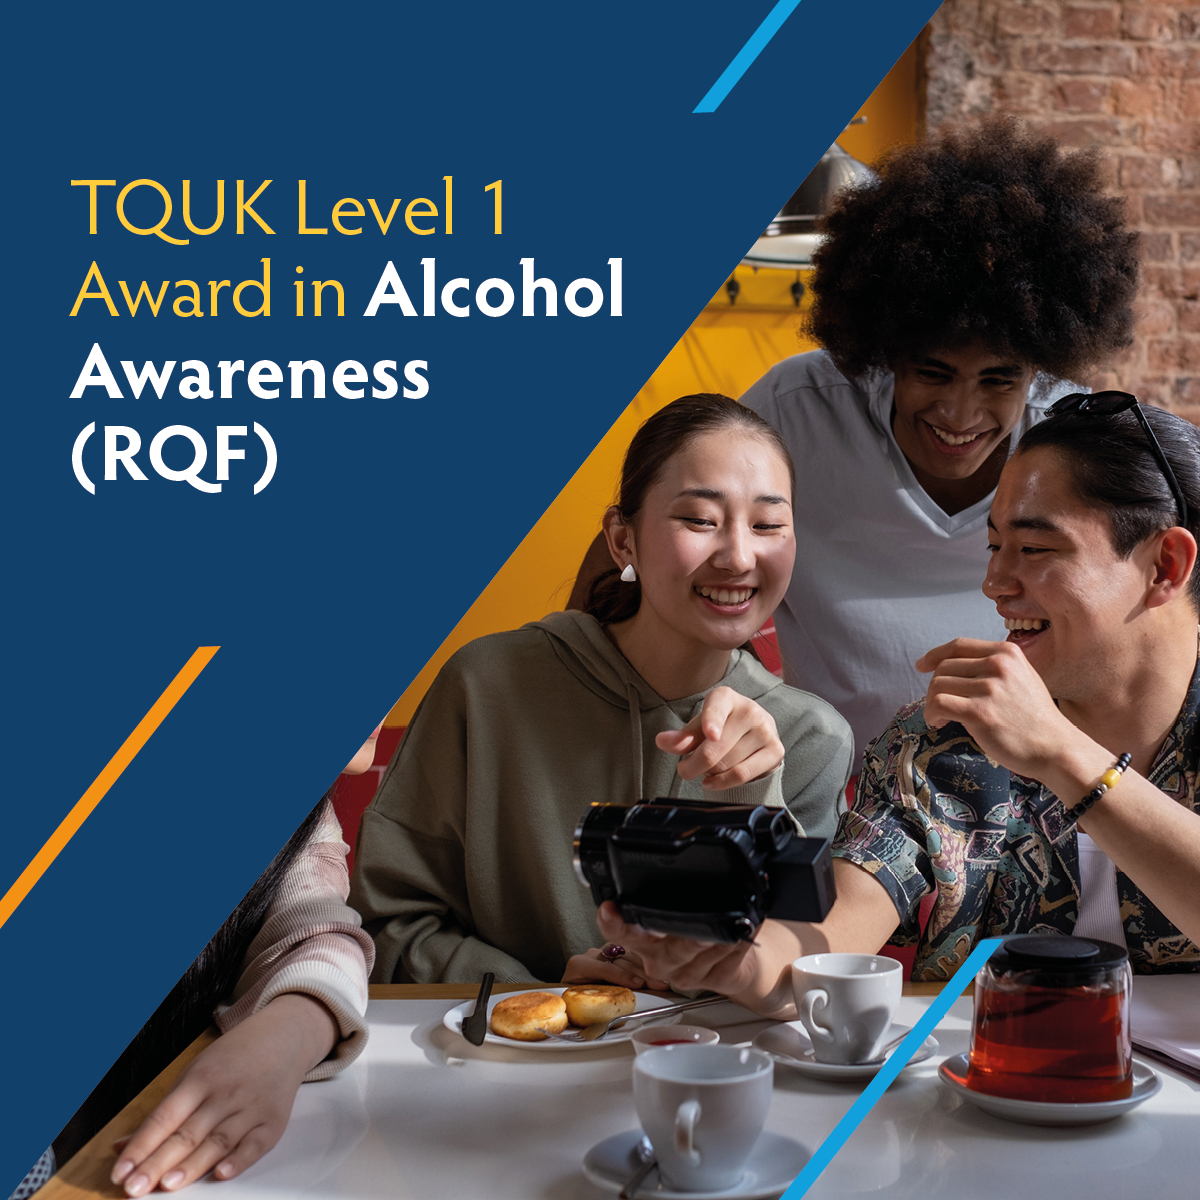 Qualification of the Month: TQUK Level 1 Award in Alcohol Awareness (RQF)